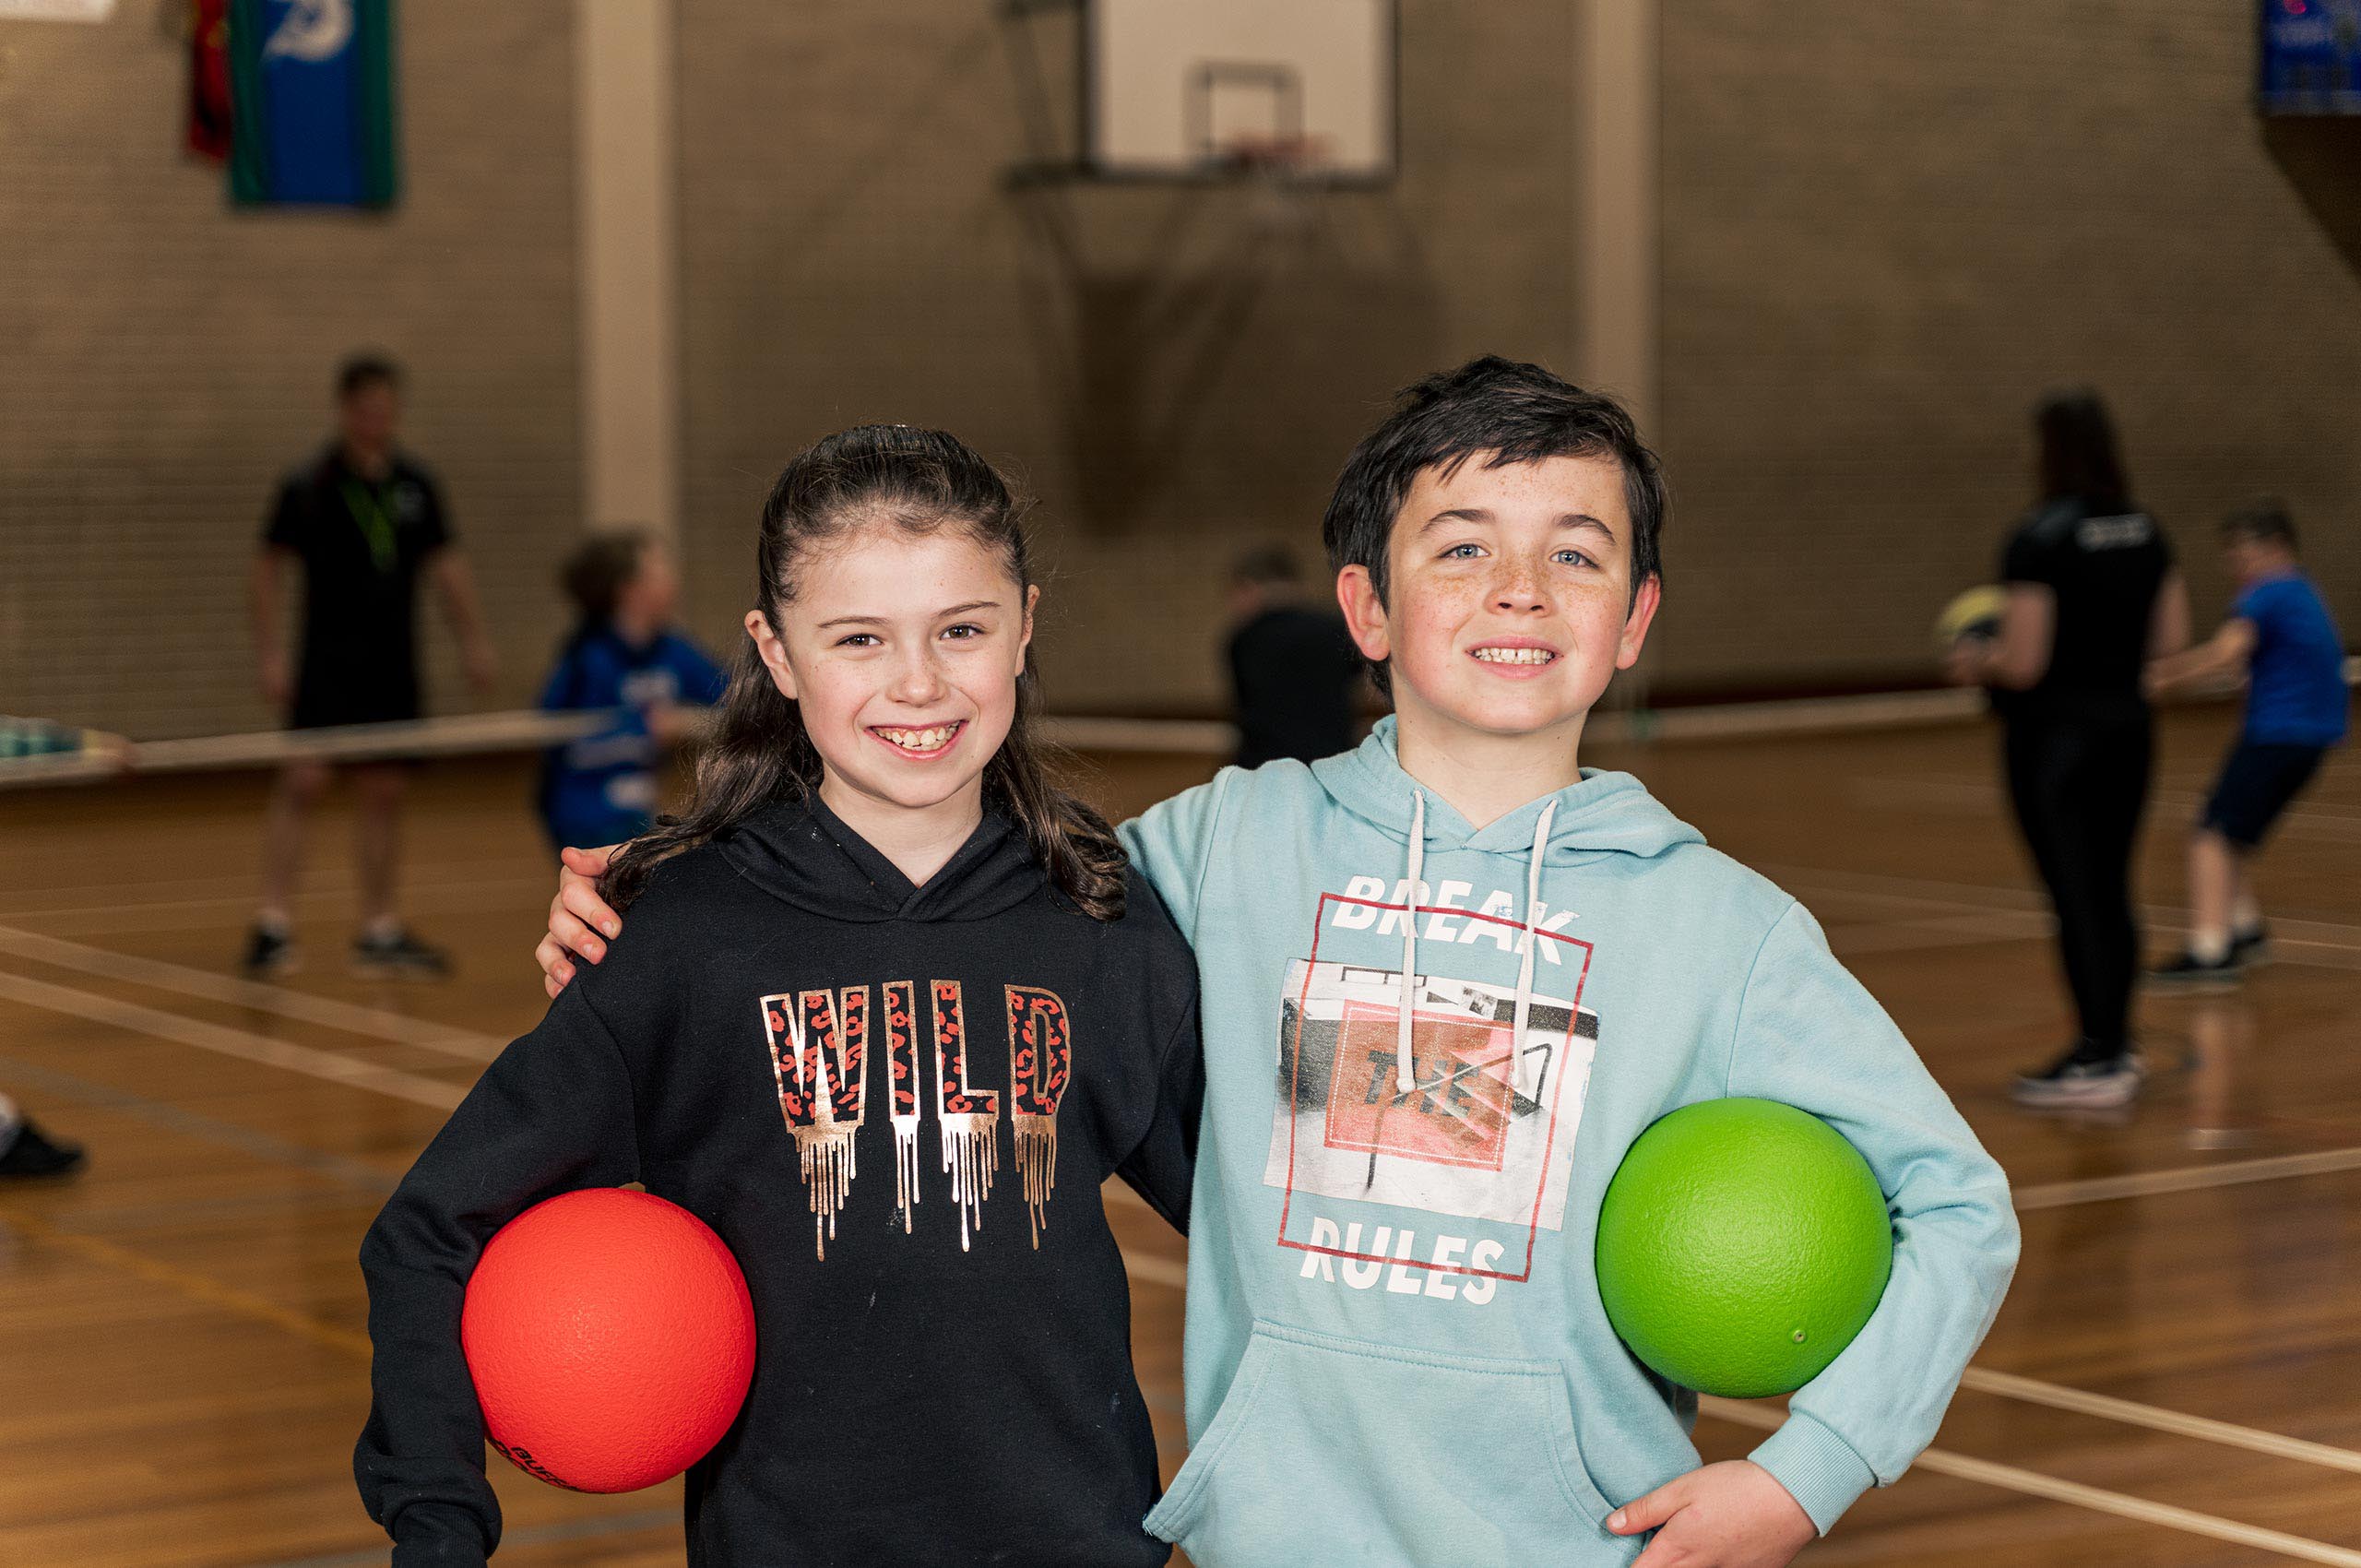 Kids smiling after a dodge ball game